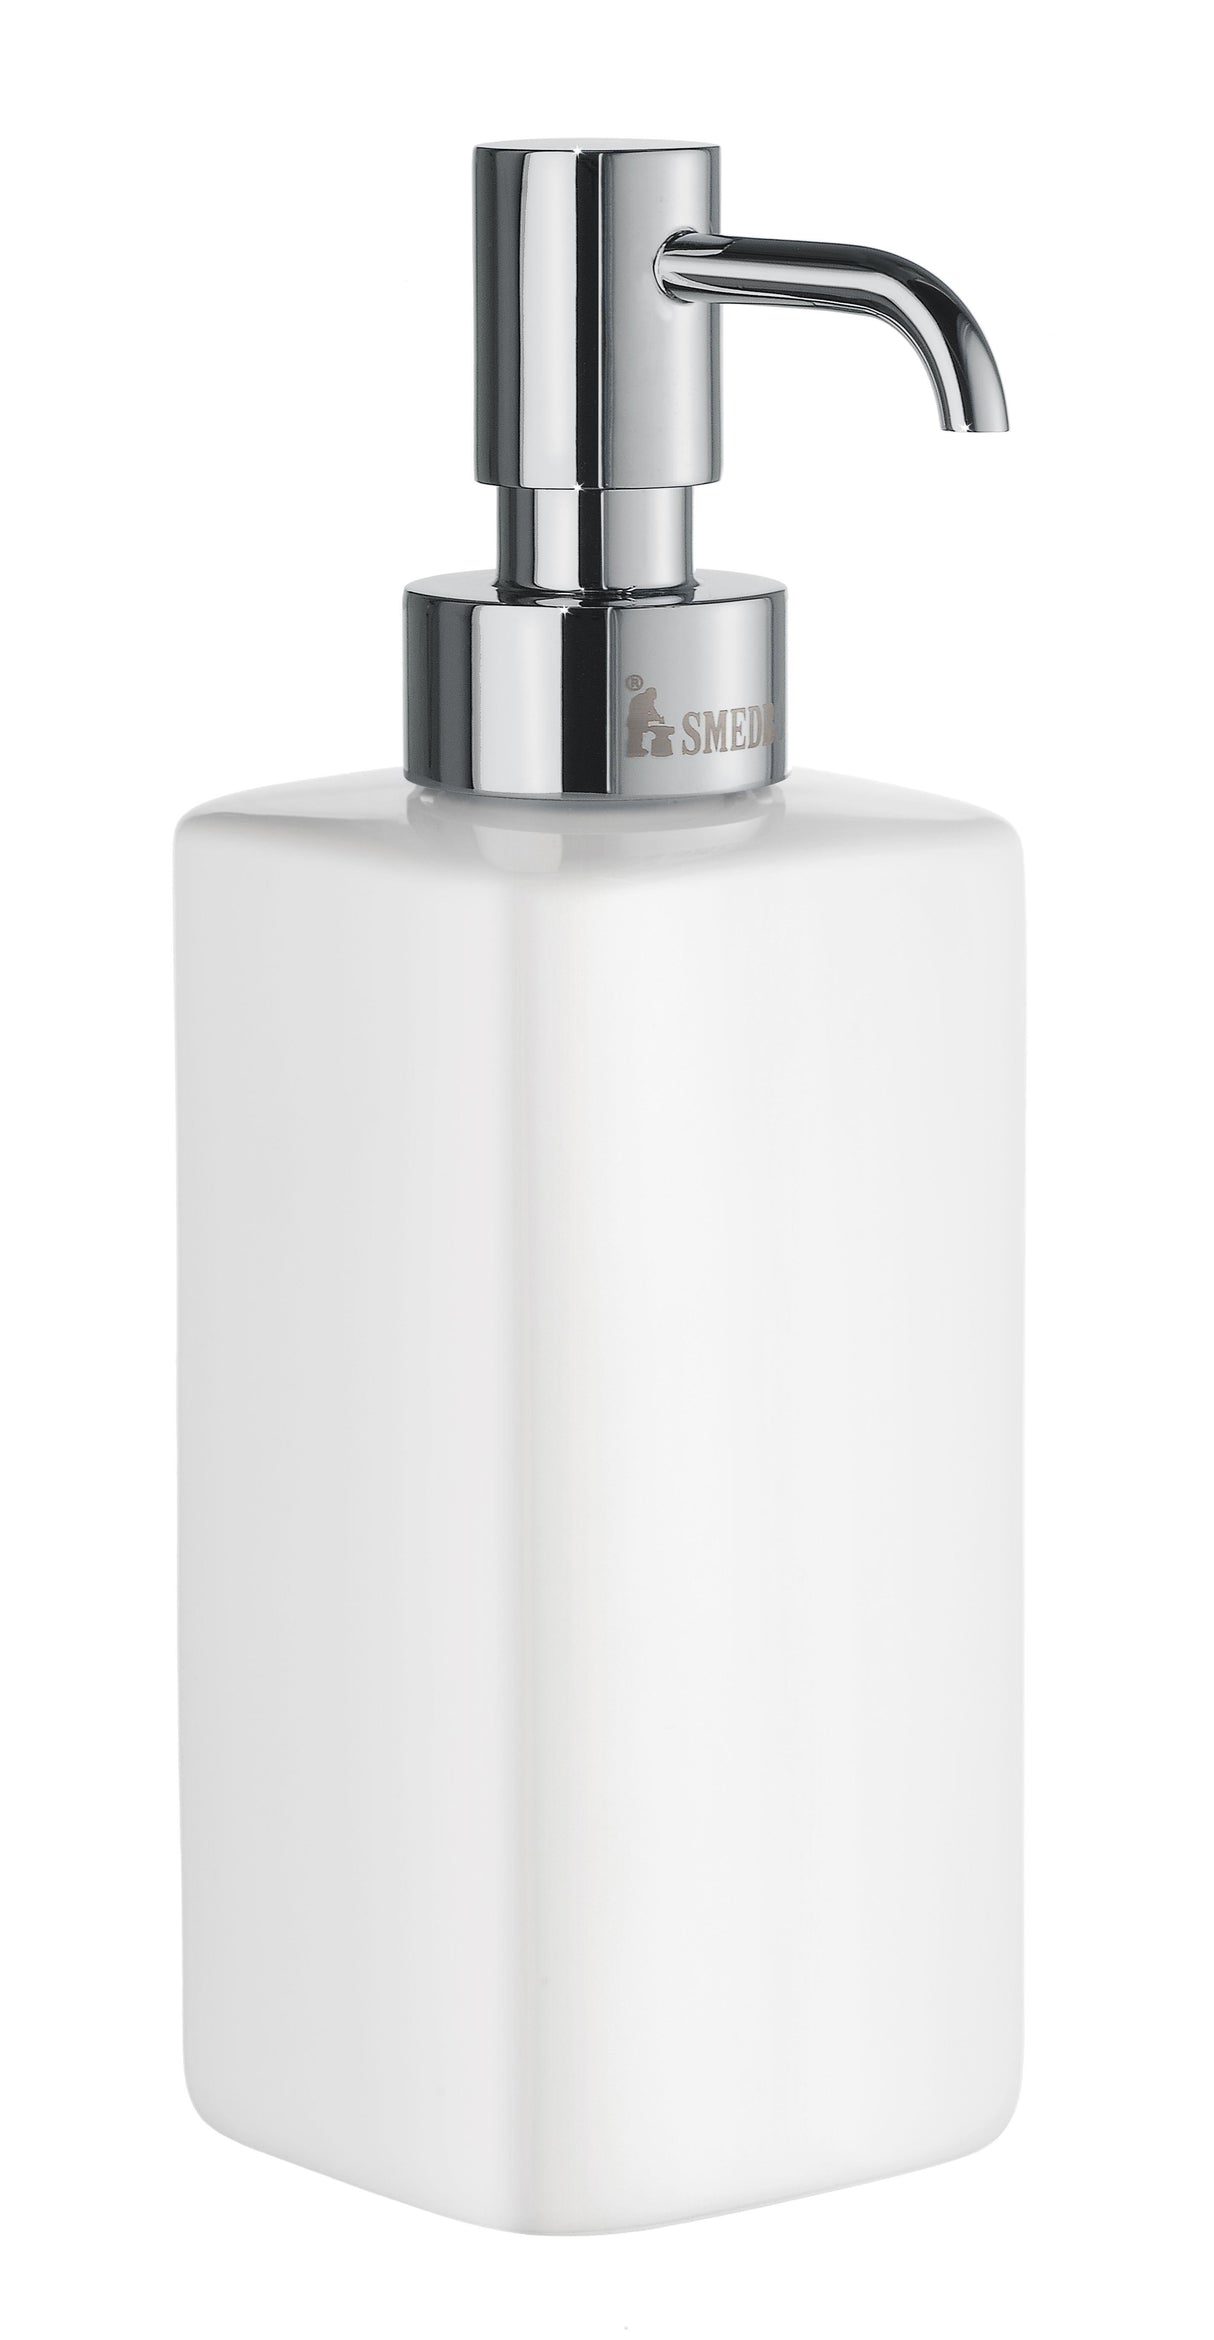 Smedbo Ice Soap Dispenser Free Standing Porcelain with Pumphead in Polished chrome